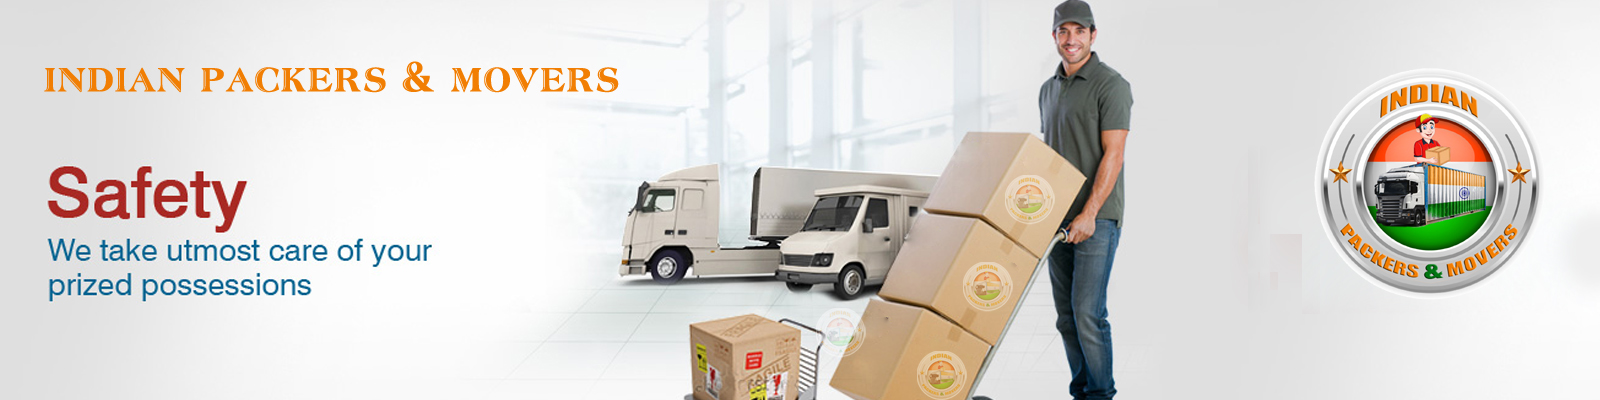 indian packers and movers banner 2 j